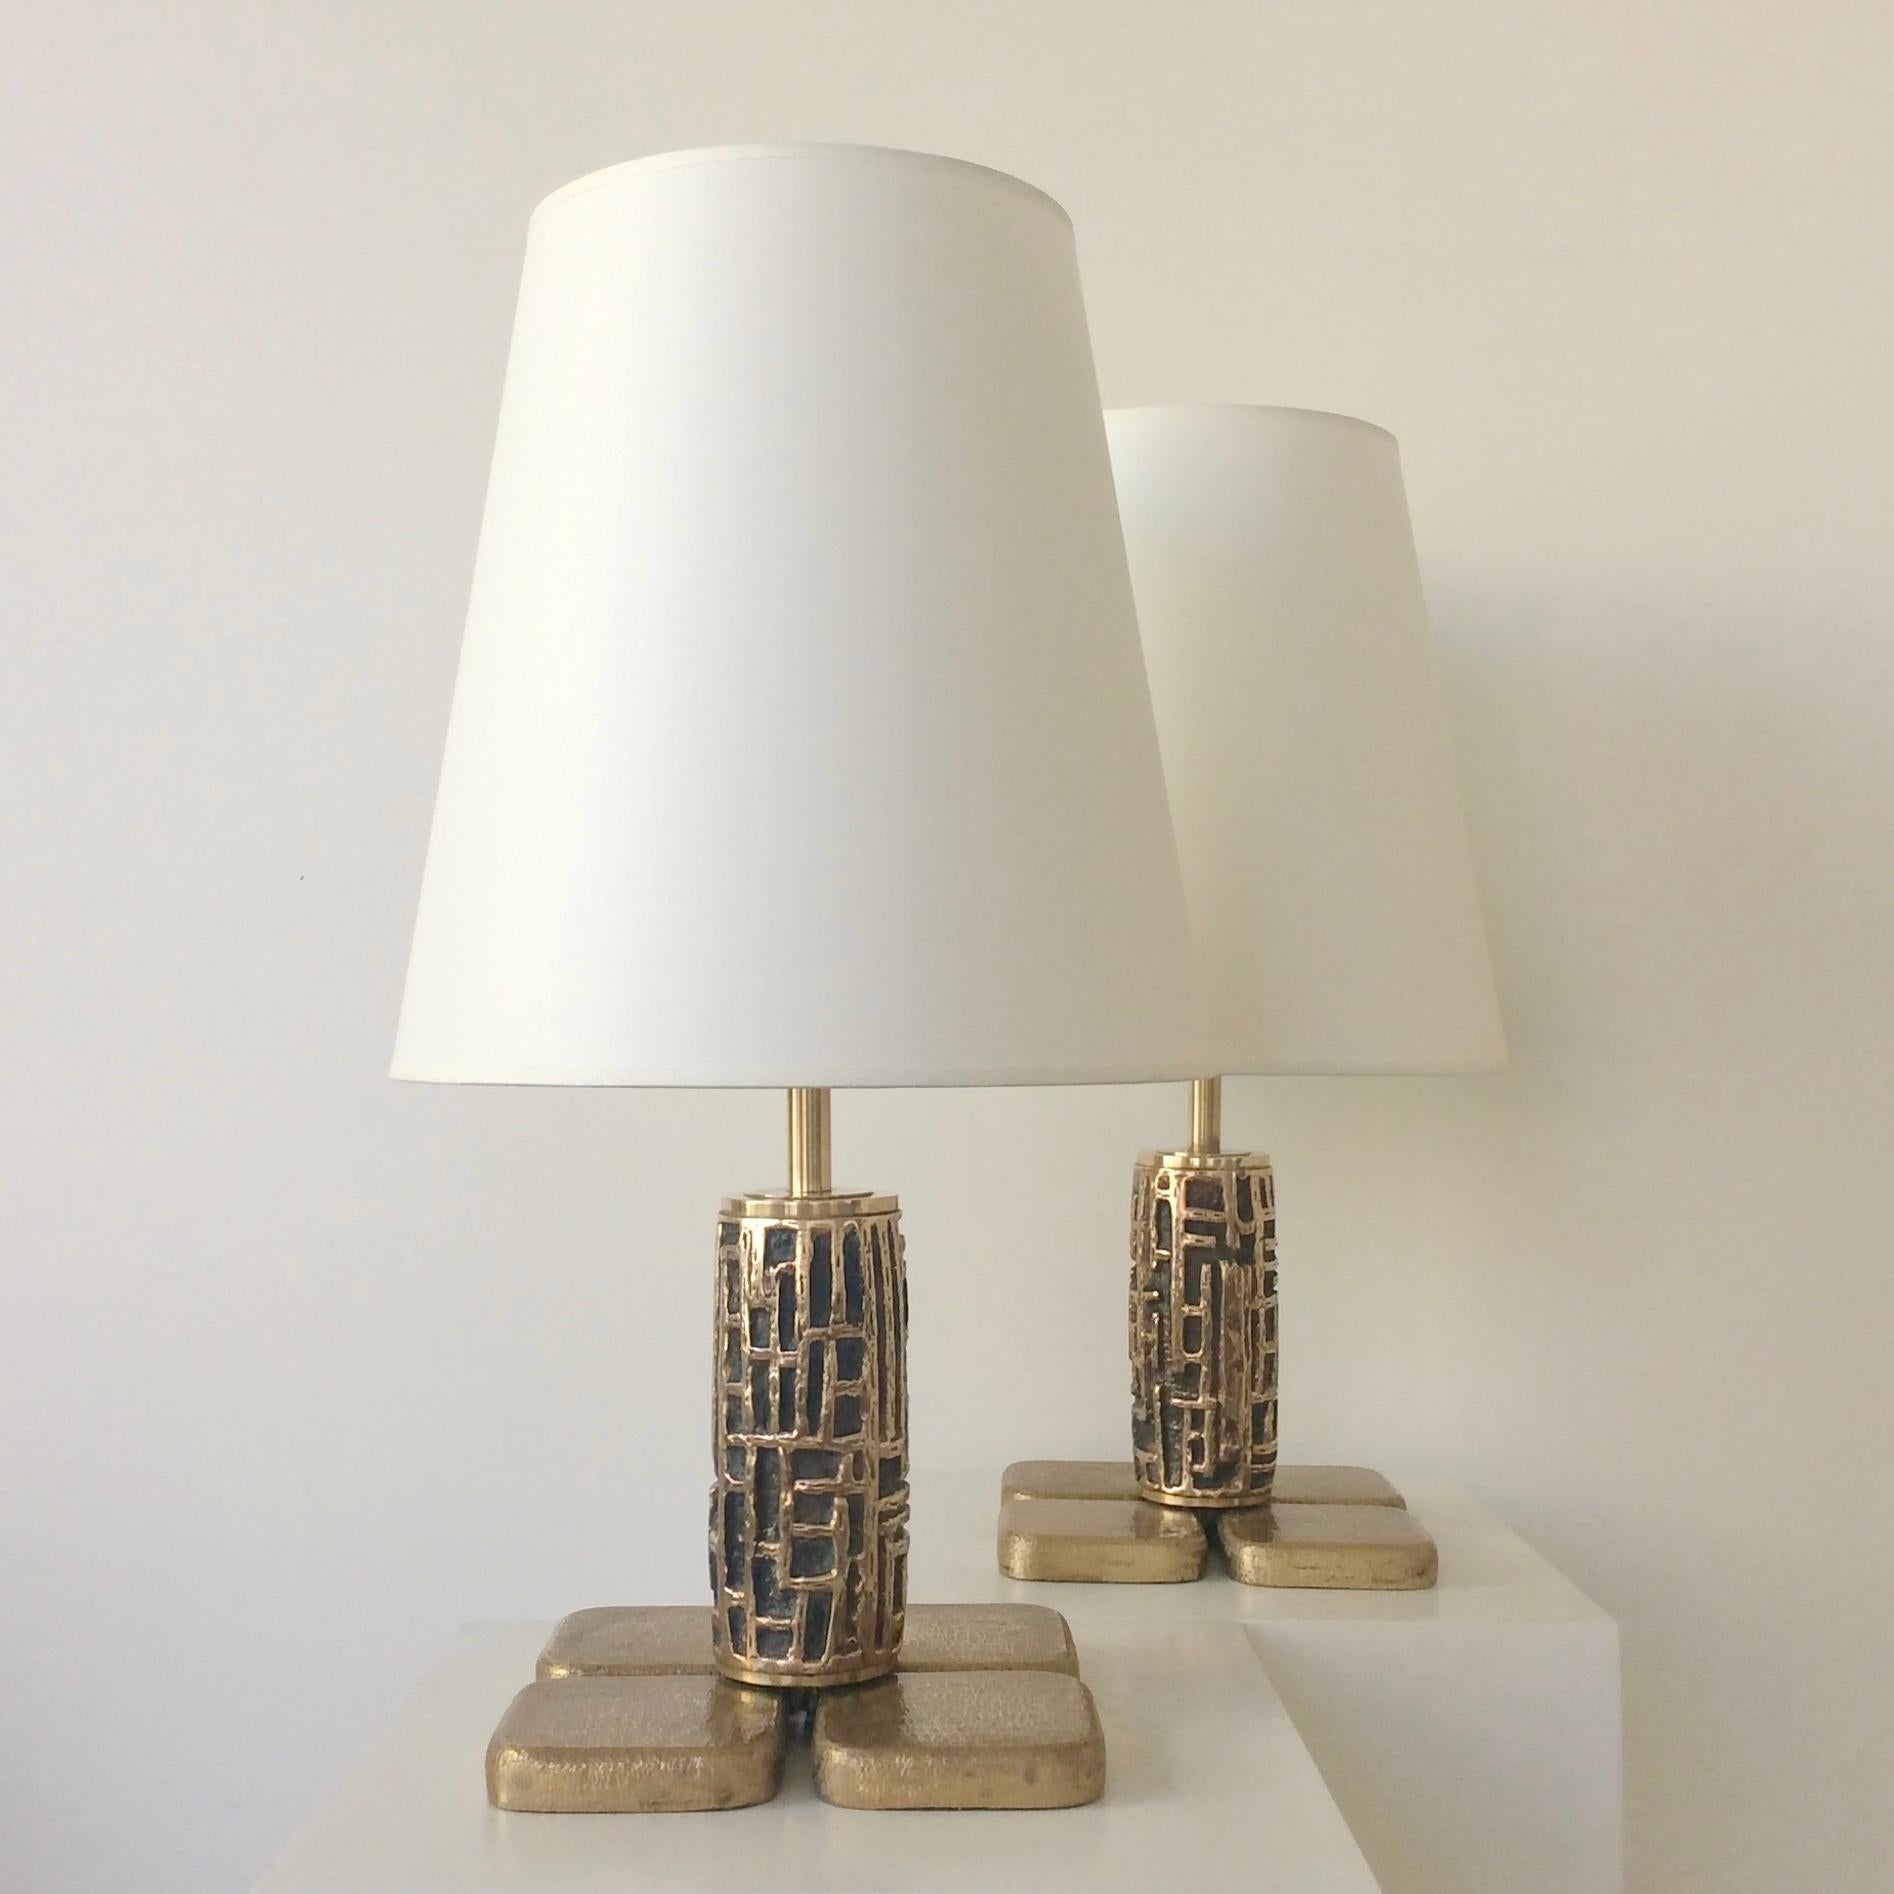 Rare Luciano Frigerio pair of table lamps for Frigerio, circa 1970, Italy.
Bronze, new off-white fabric shades.
One E27 bulb of 40W per lamp.
Beautiful patina of the bronze, monogrammed 